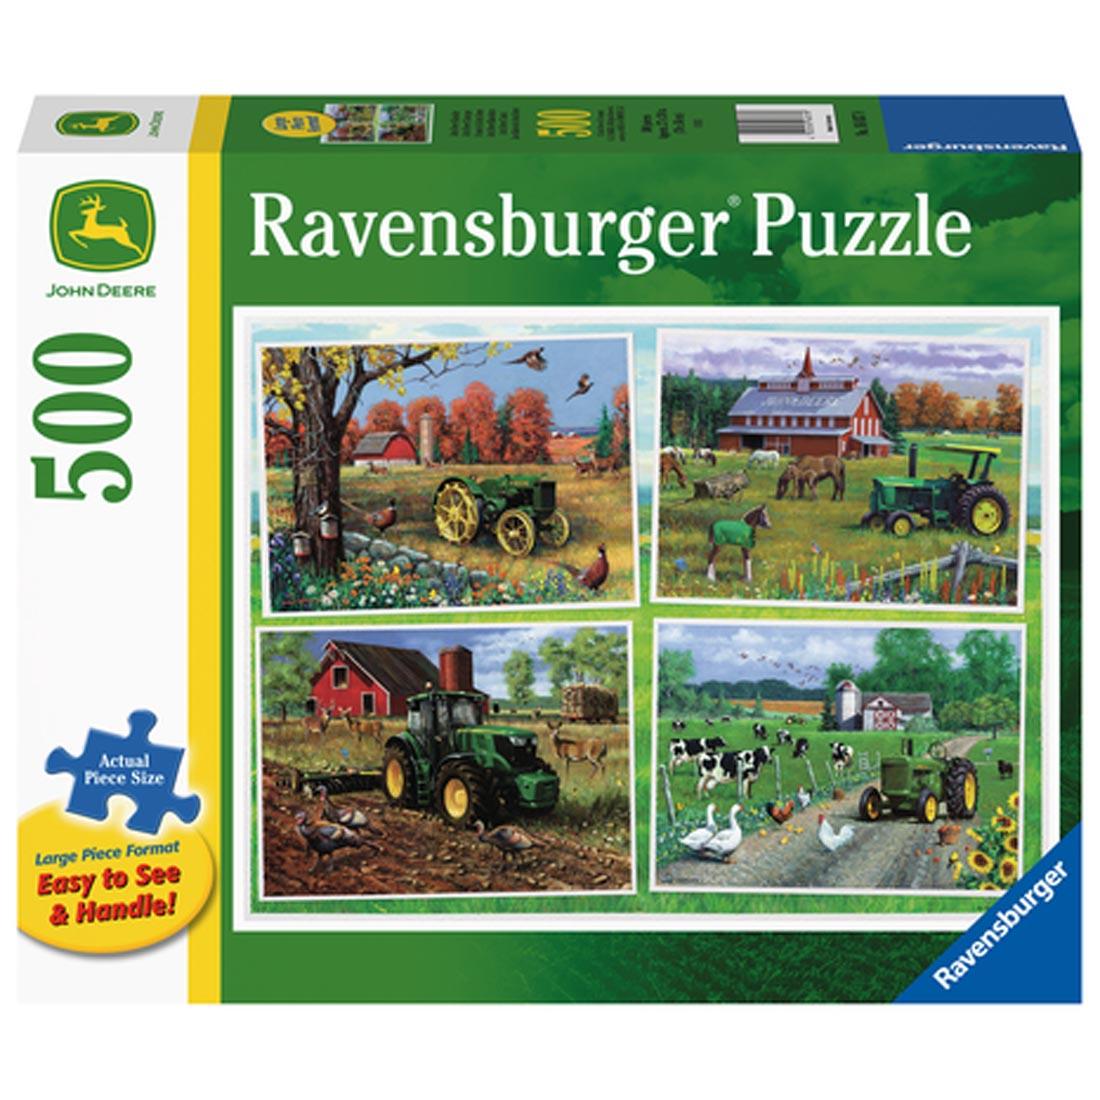 Box cover of the John Deere Classic Large Format 500-Piece Puzzle By Ravensburger